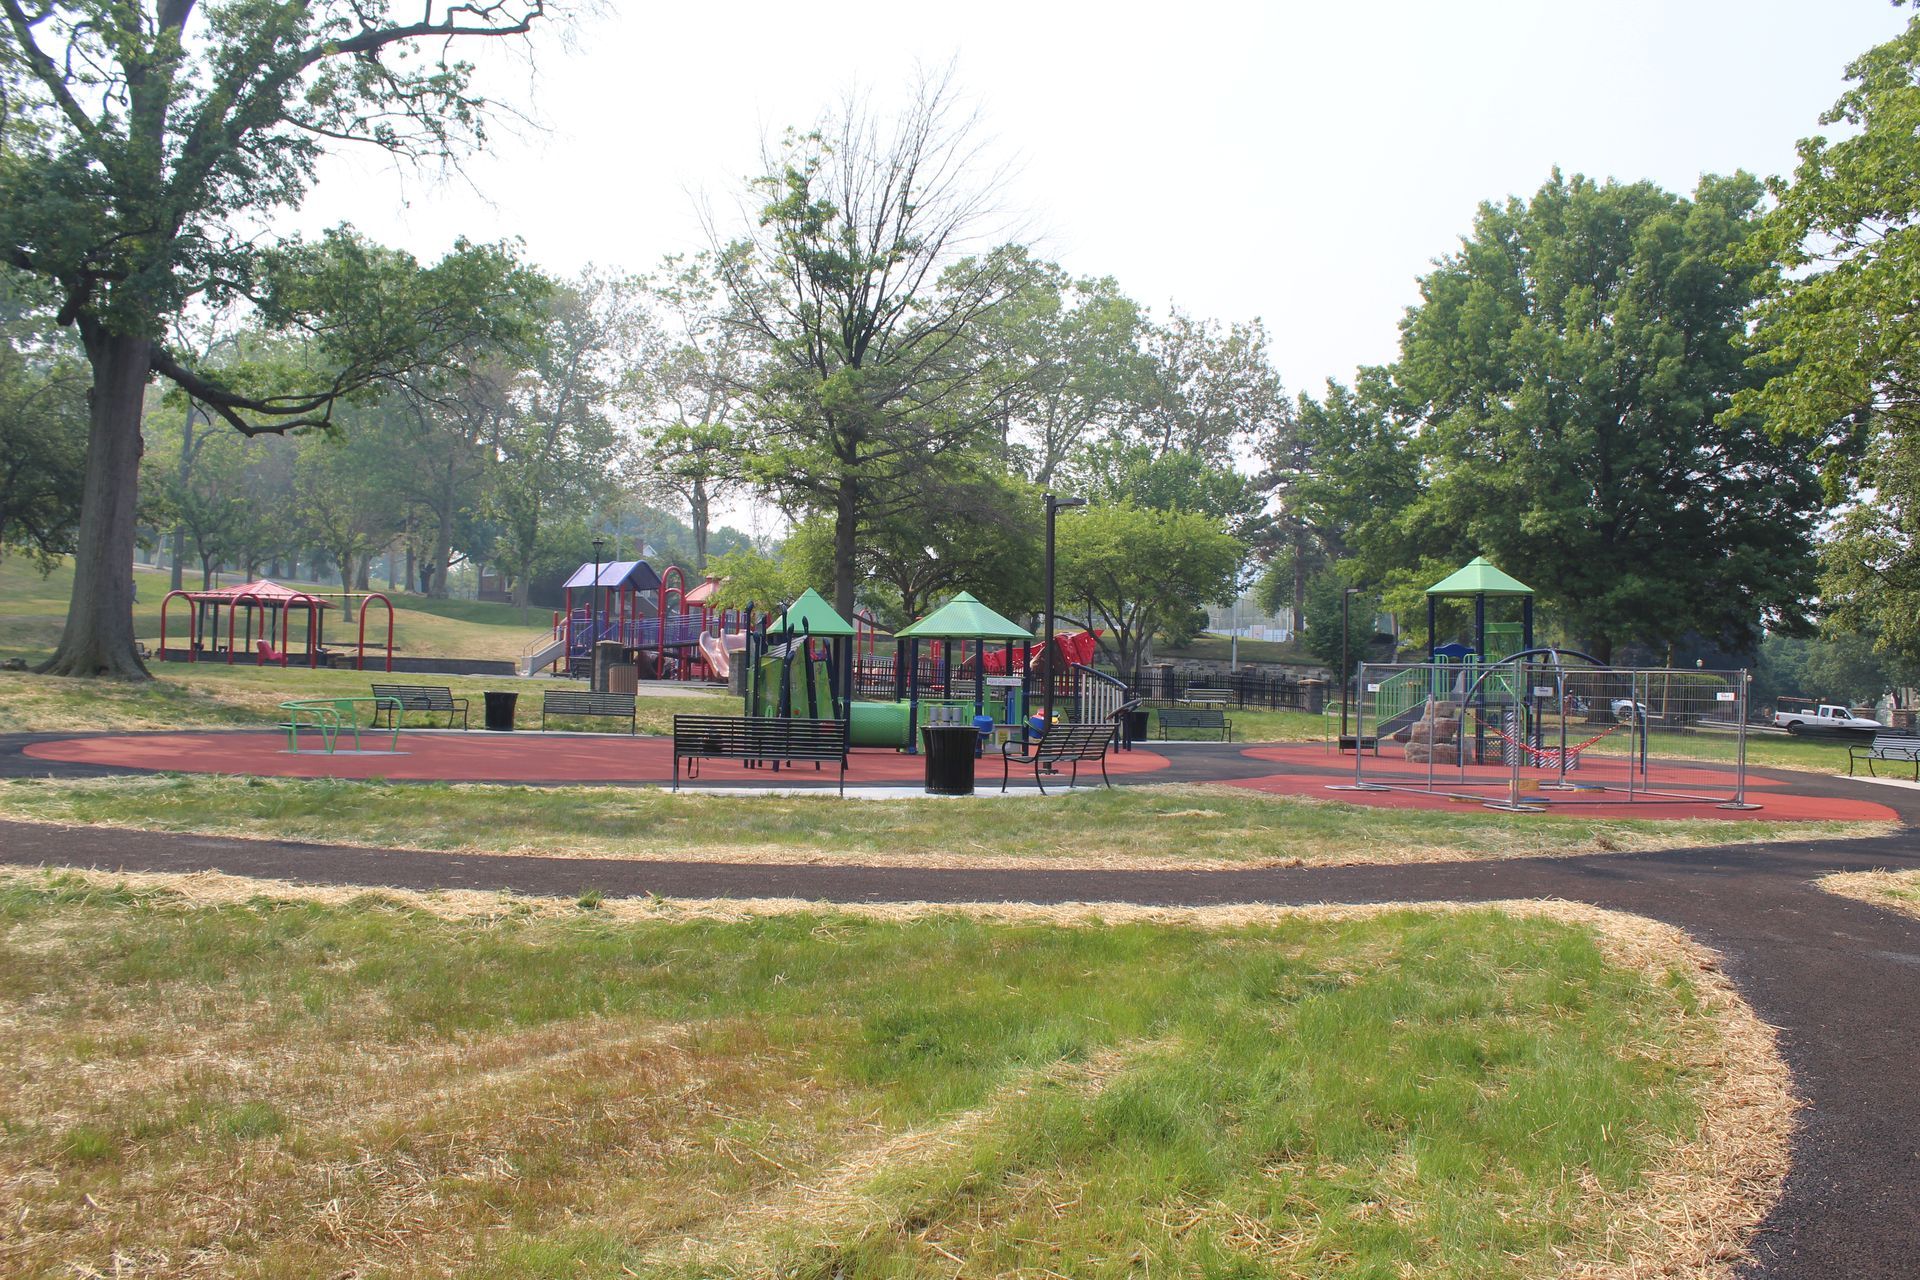 A playground in a park with trees in the background